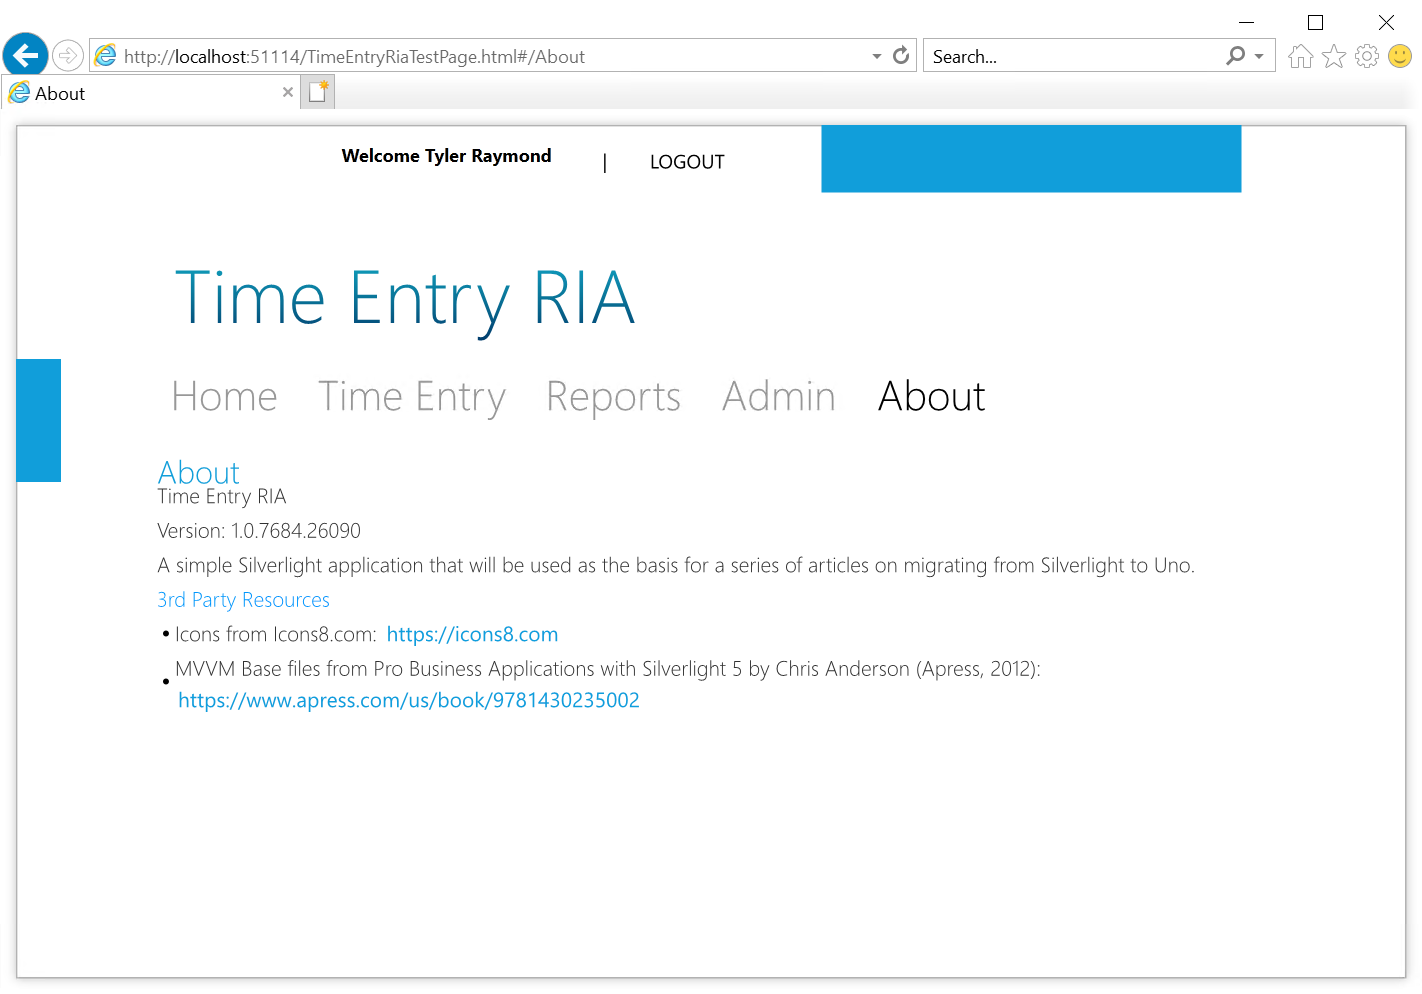 Time Entry RIA logged in displaying about view